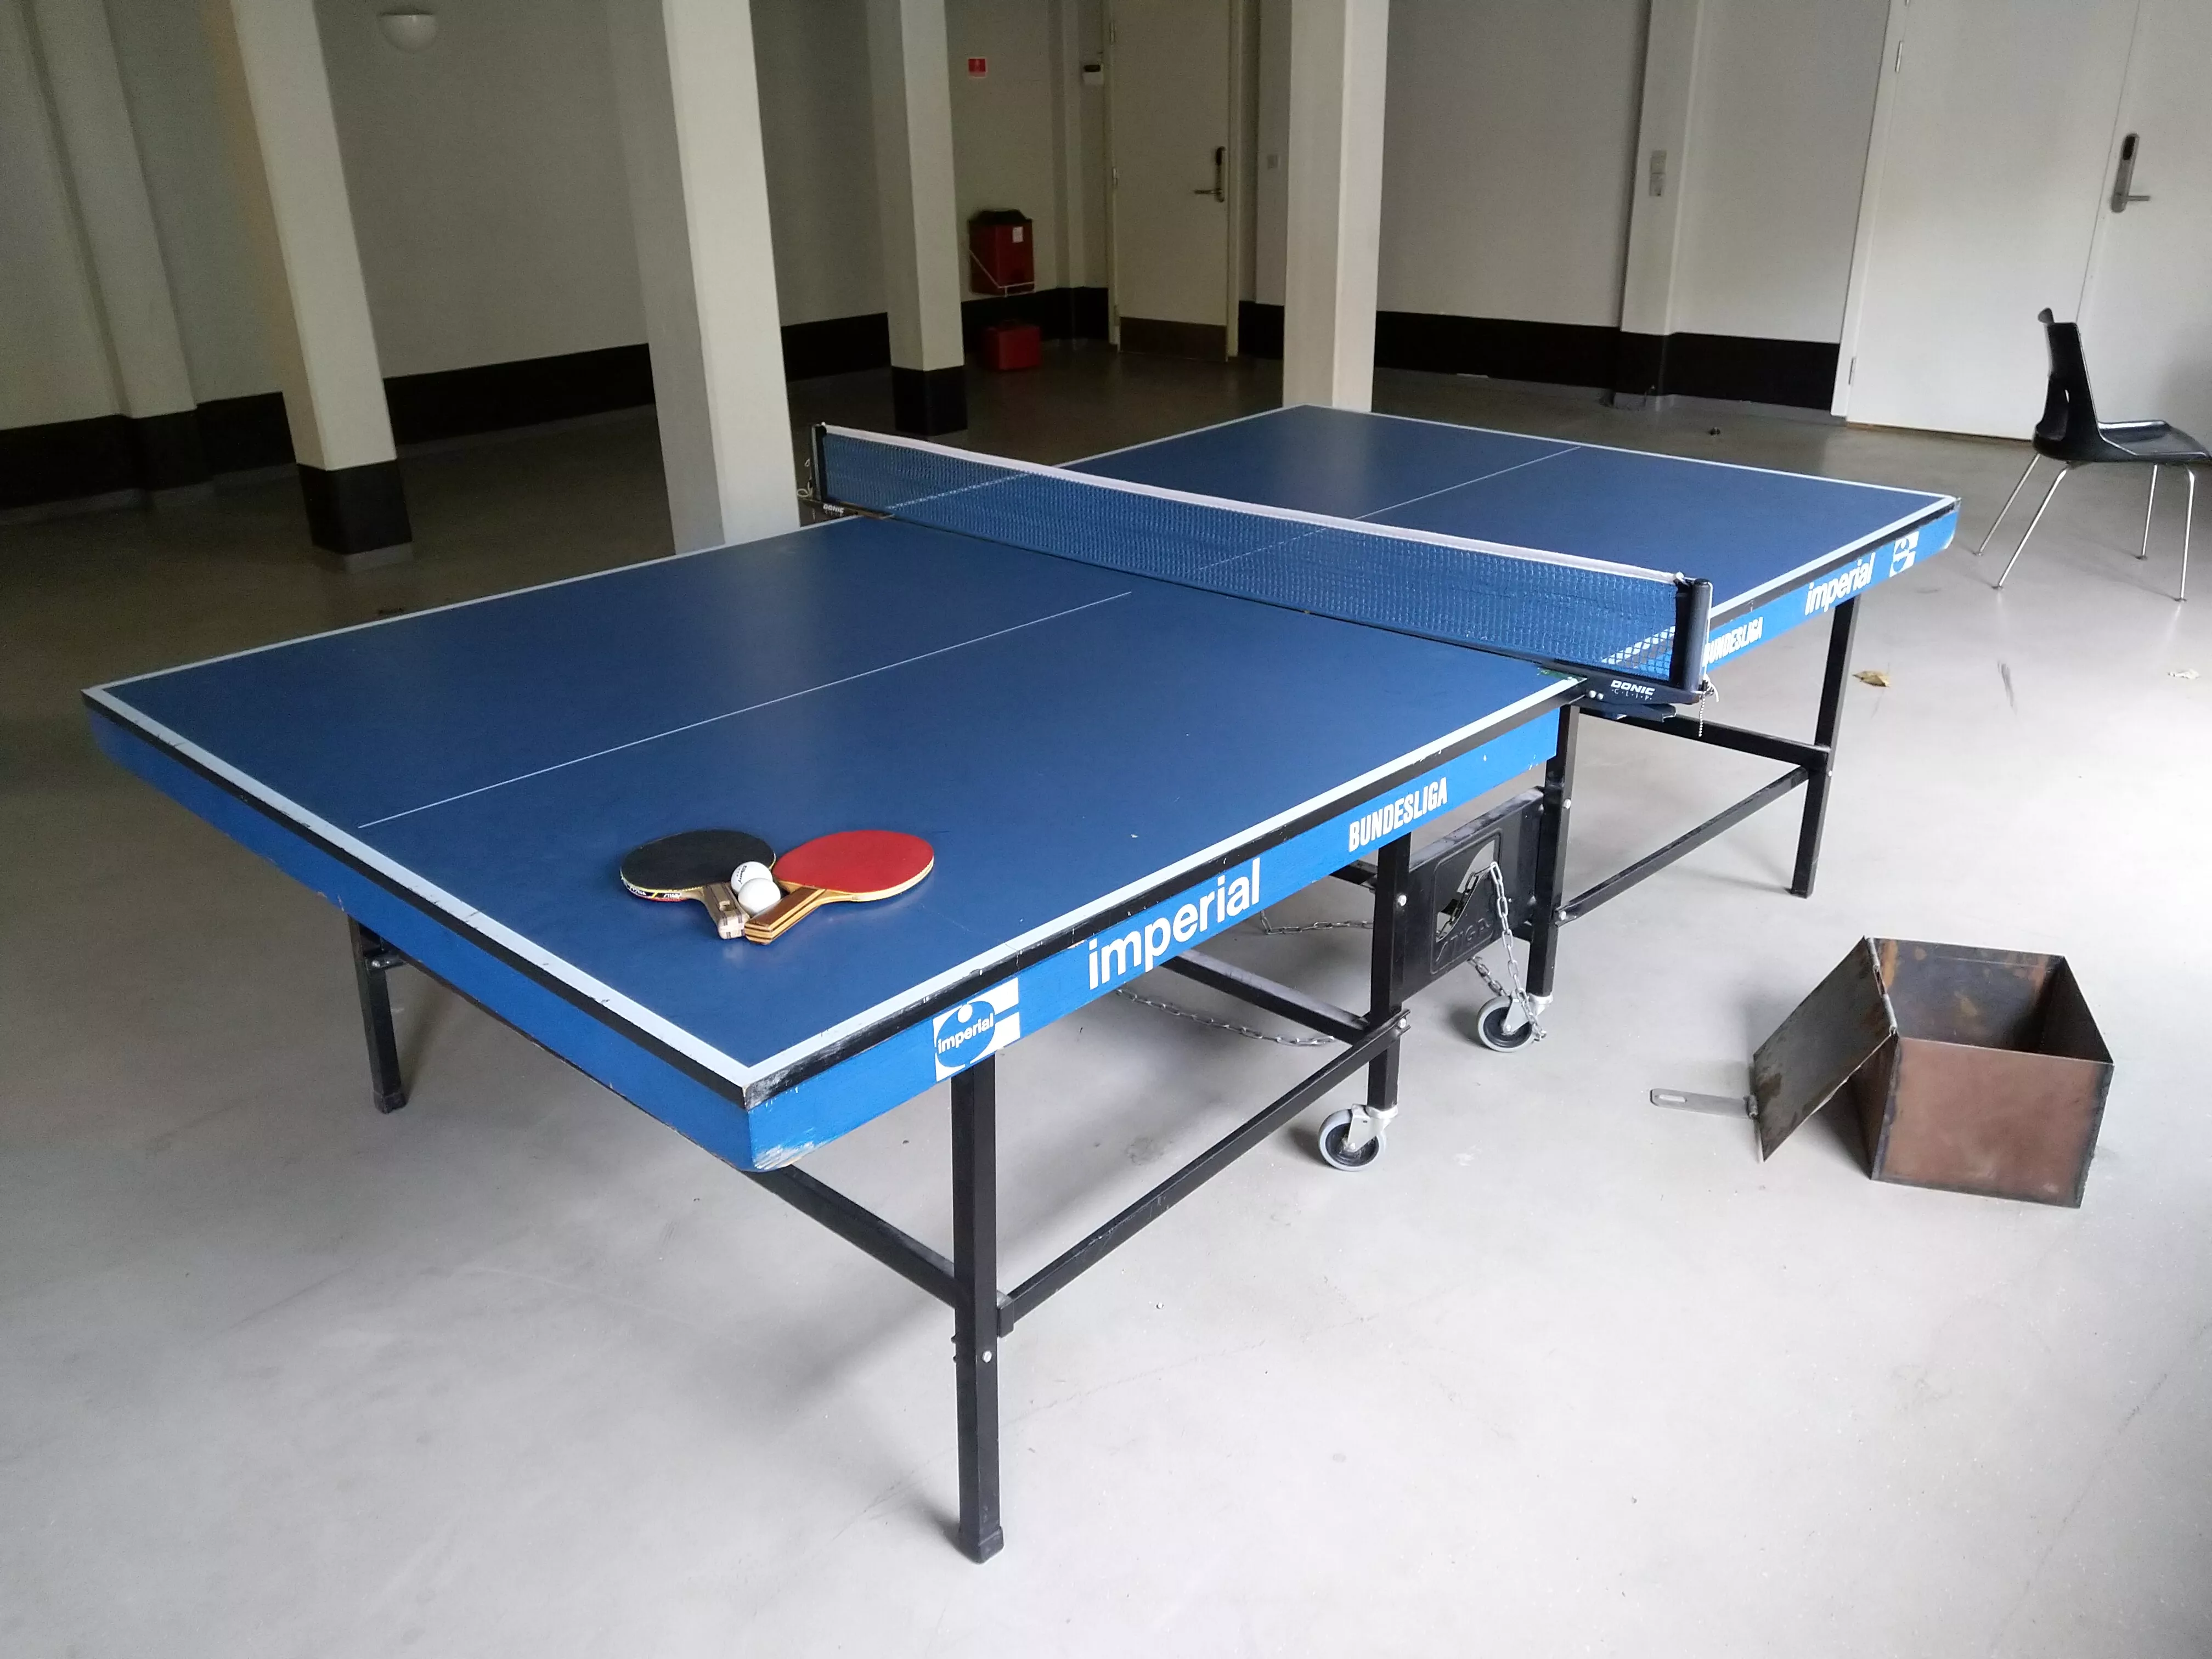 AS Sans Souci in Belgium, Europe | Ping-Pong - Rated 0.9